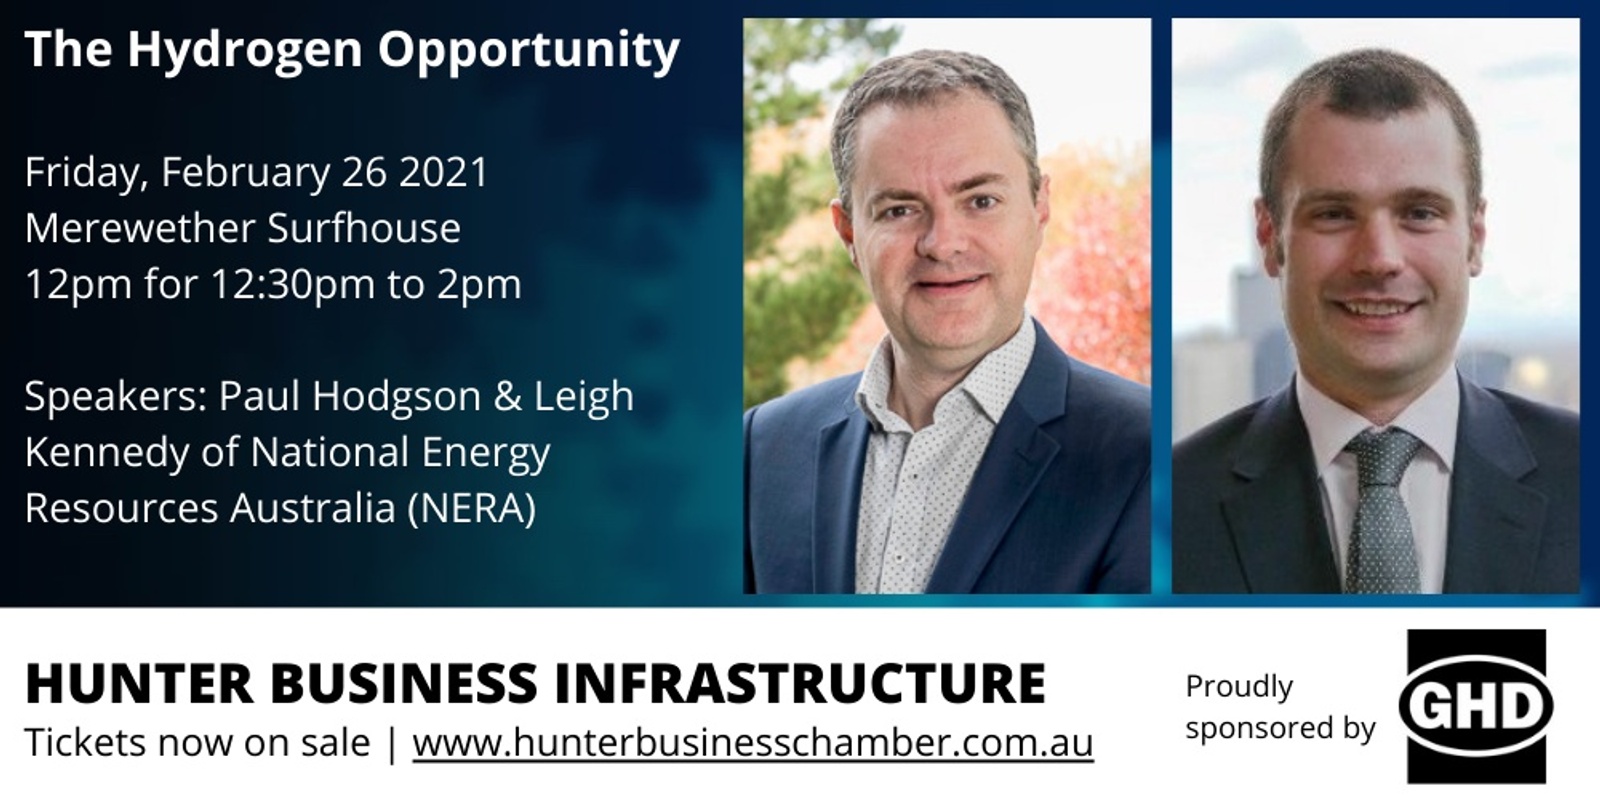 Banner image for Hunter Business Infrastructure "The Hydrogen Opportunity" 